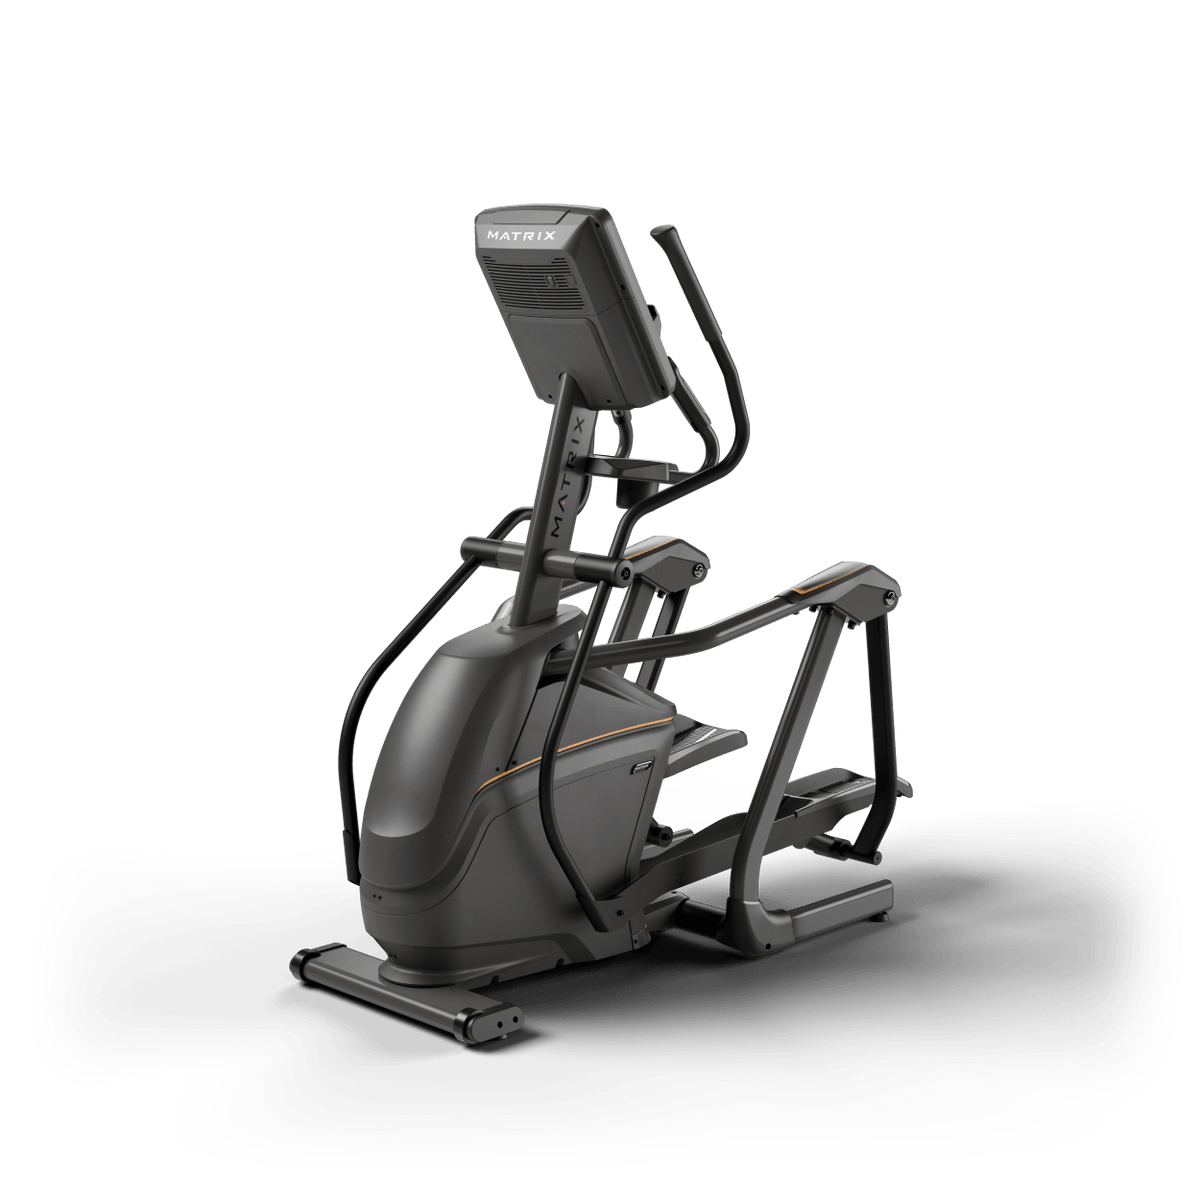 Matrix Fitness Lifestyle Elliptical with Premium LED Console rear view | Fitness Experience